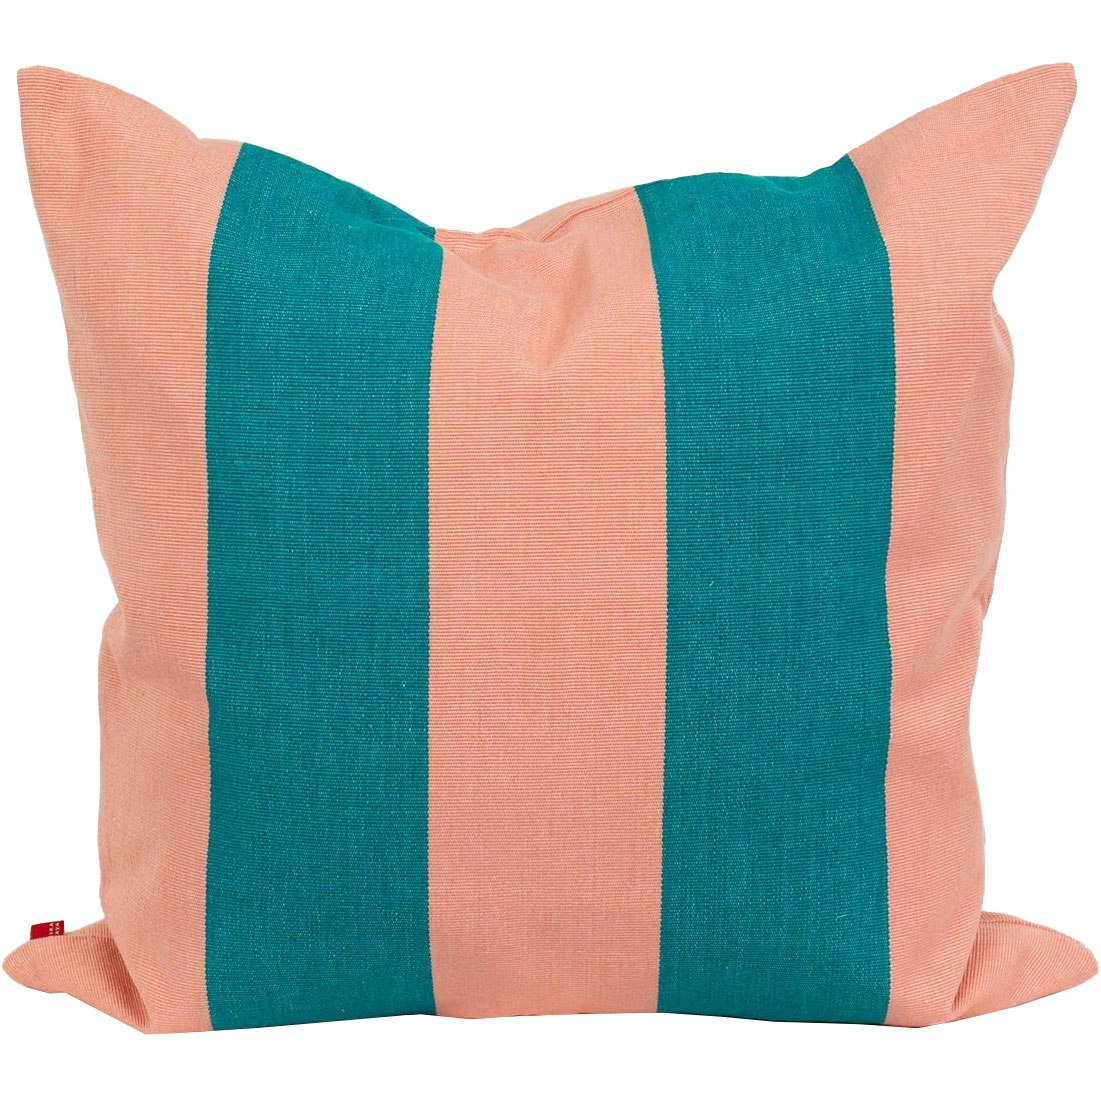 Fifi Cushion Cover 50x50 cm, Pink/Turquoise